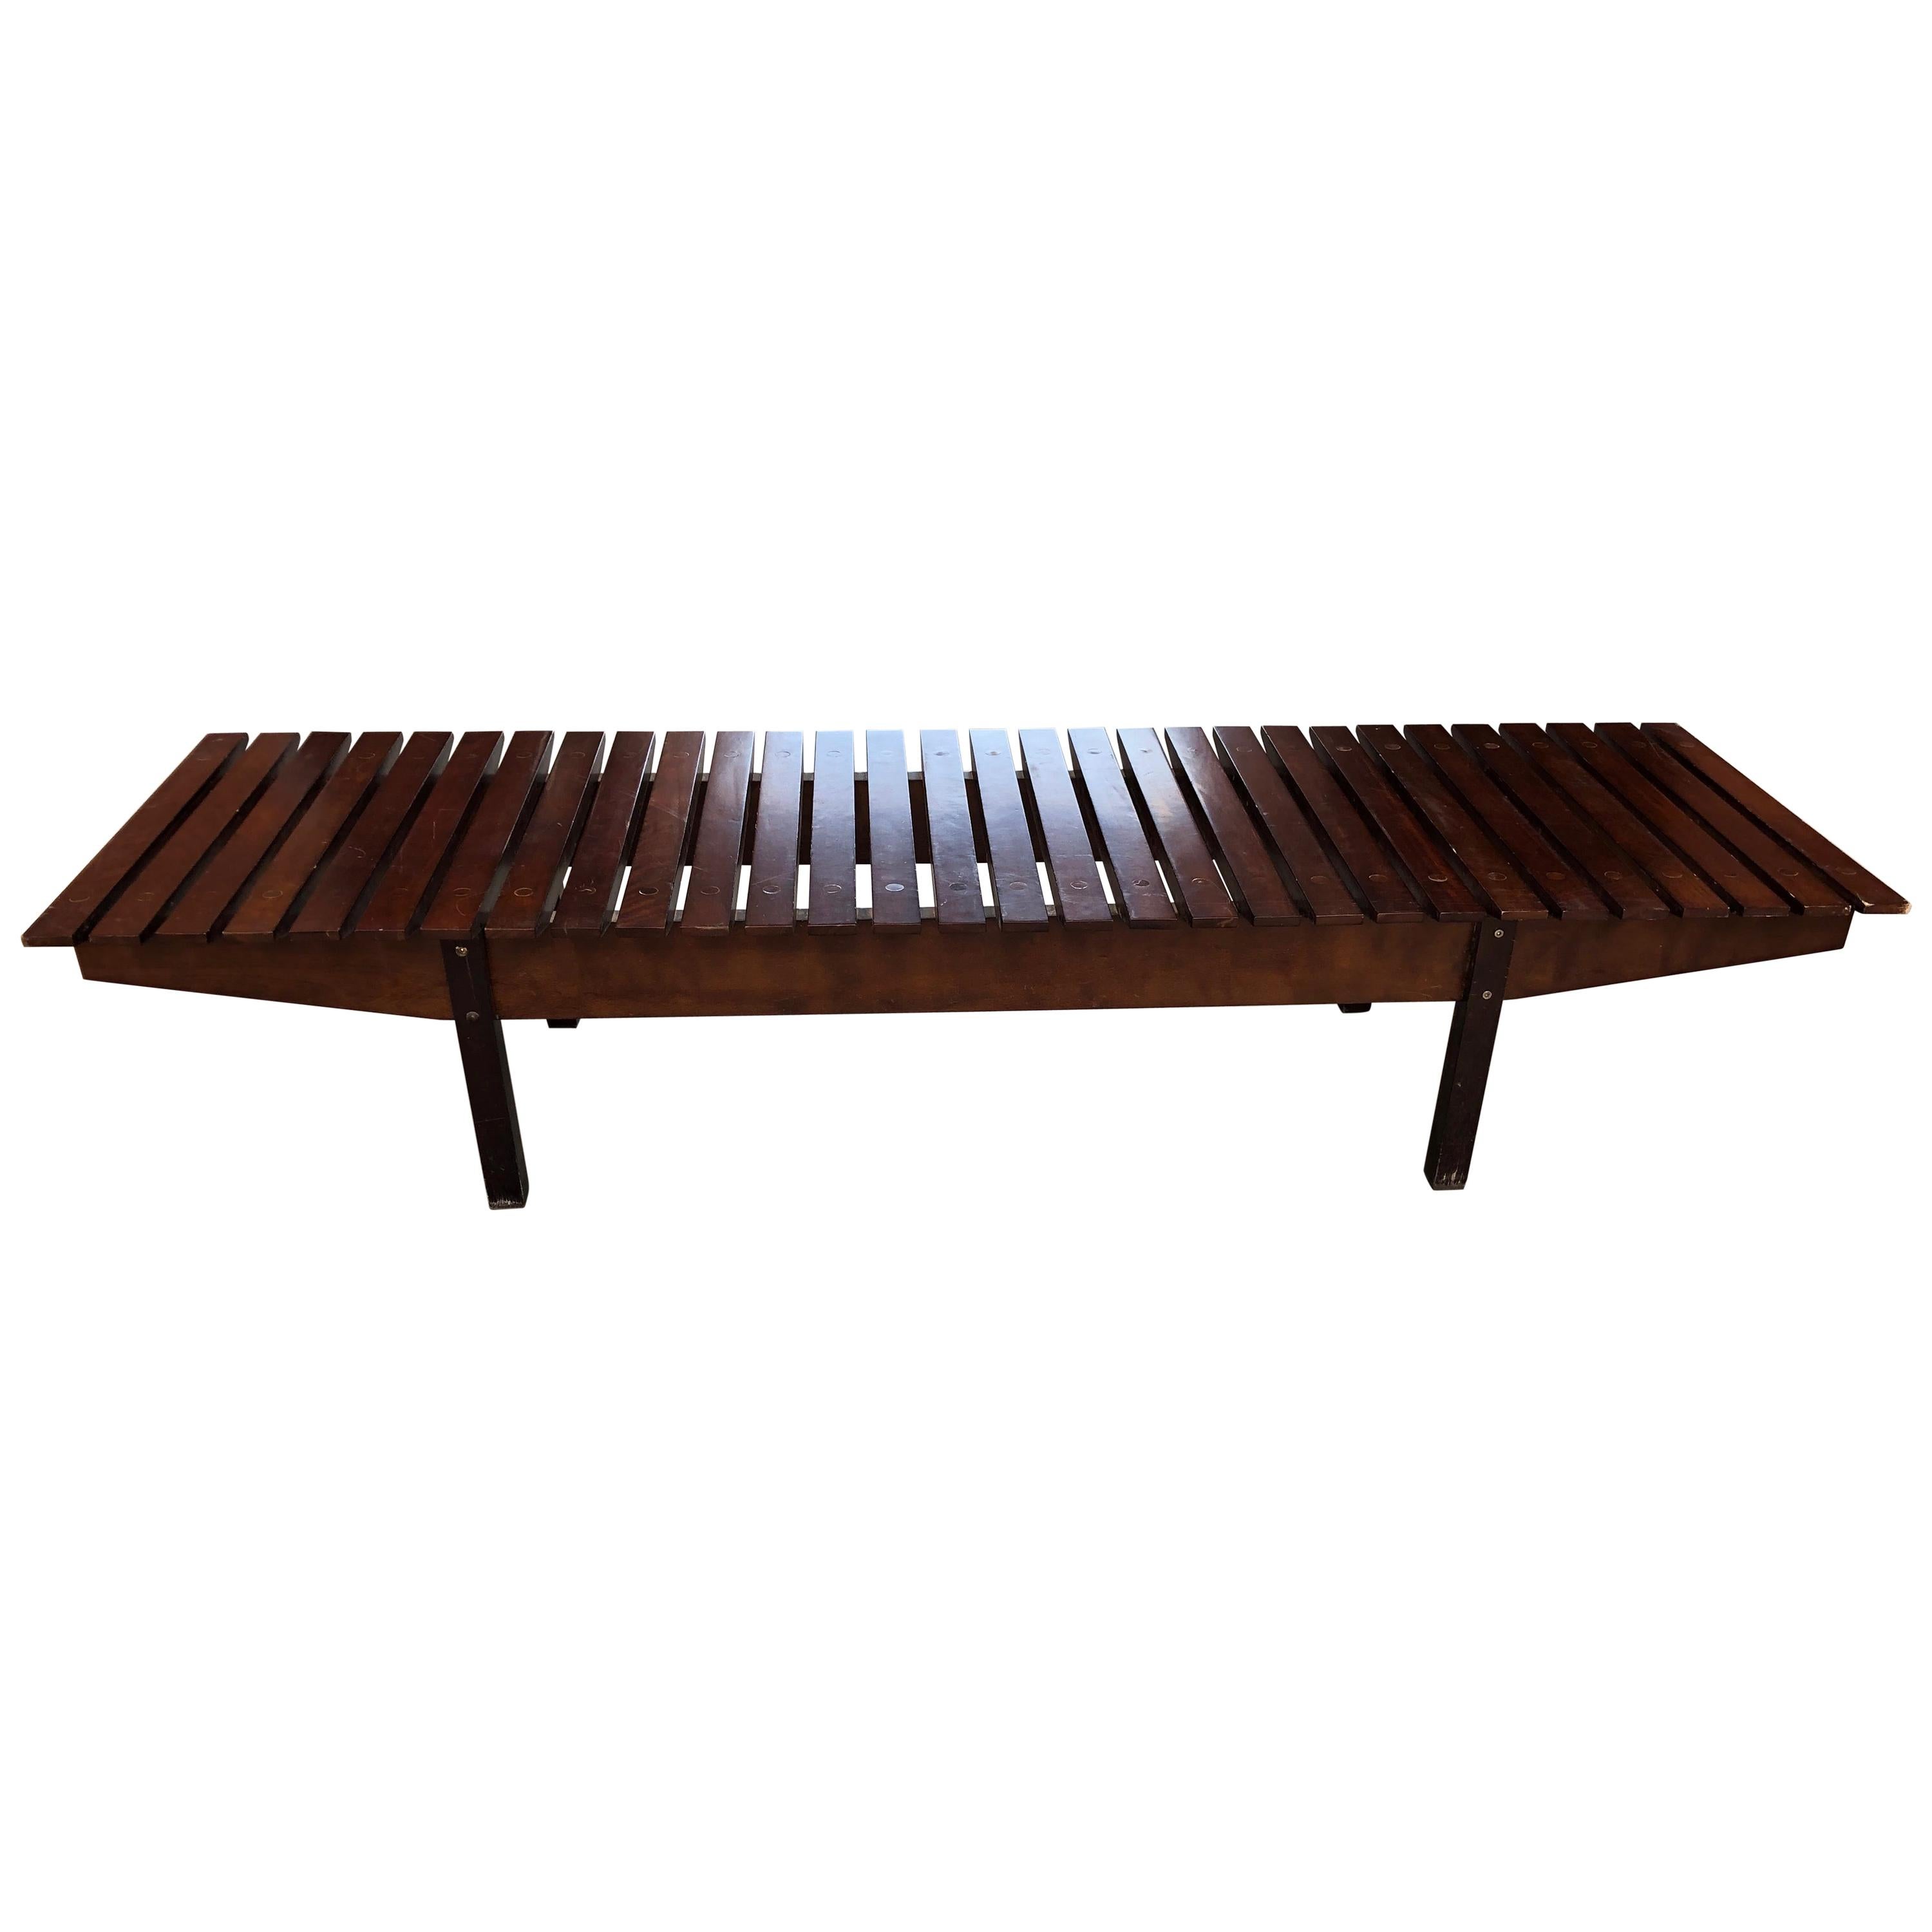 Solid Rosewood "Mucki" Bench by Sergio Rodrigues, 1958 For Sale